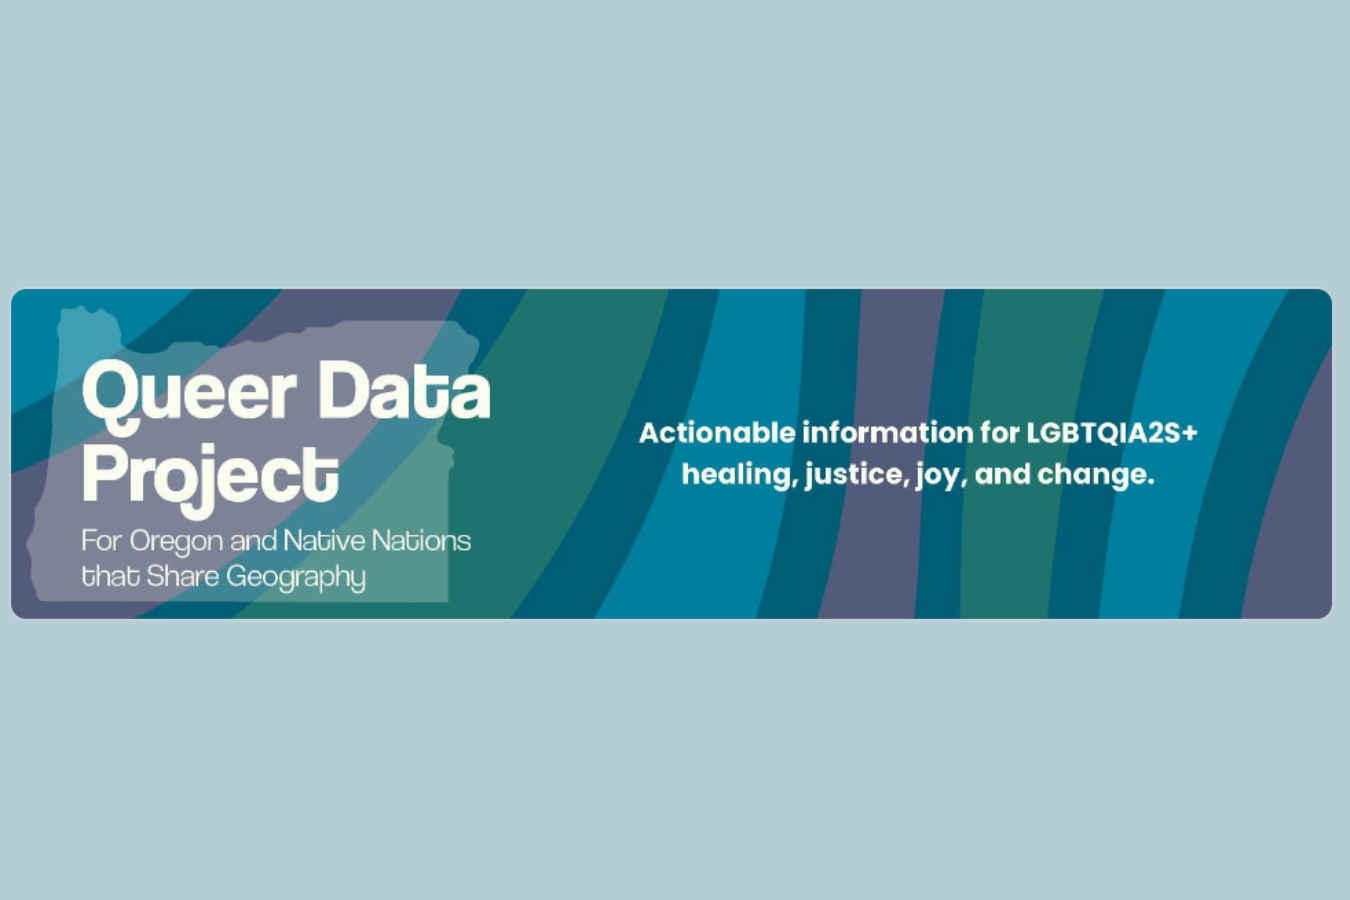 Colorful purple, blue and green lines in the background and an outline of Oregon state. Over the state outline says "Queer Data Project" below "For Oregon and Native nations that Share Geography" and to the right "Actionable information for LGBTQIA2S+"